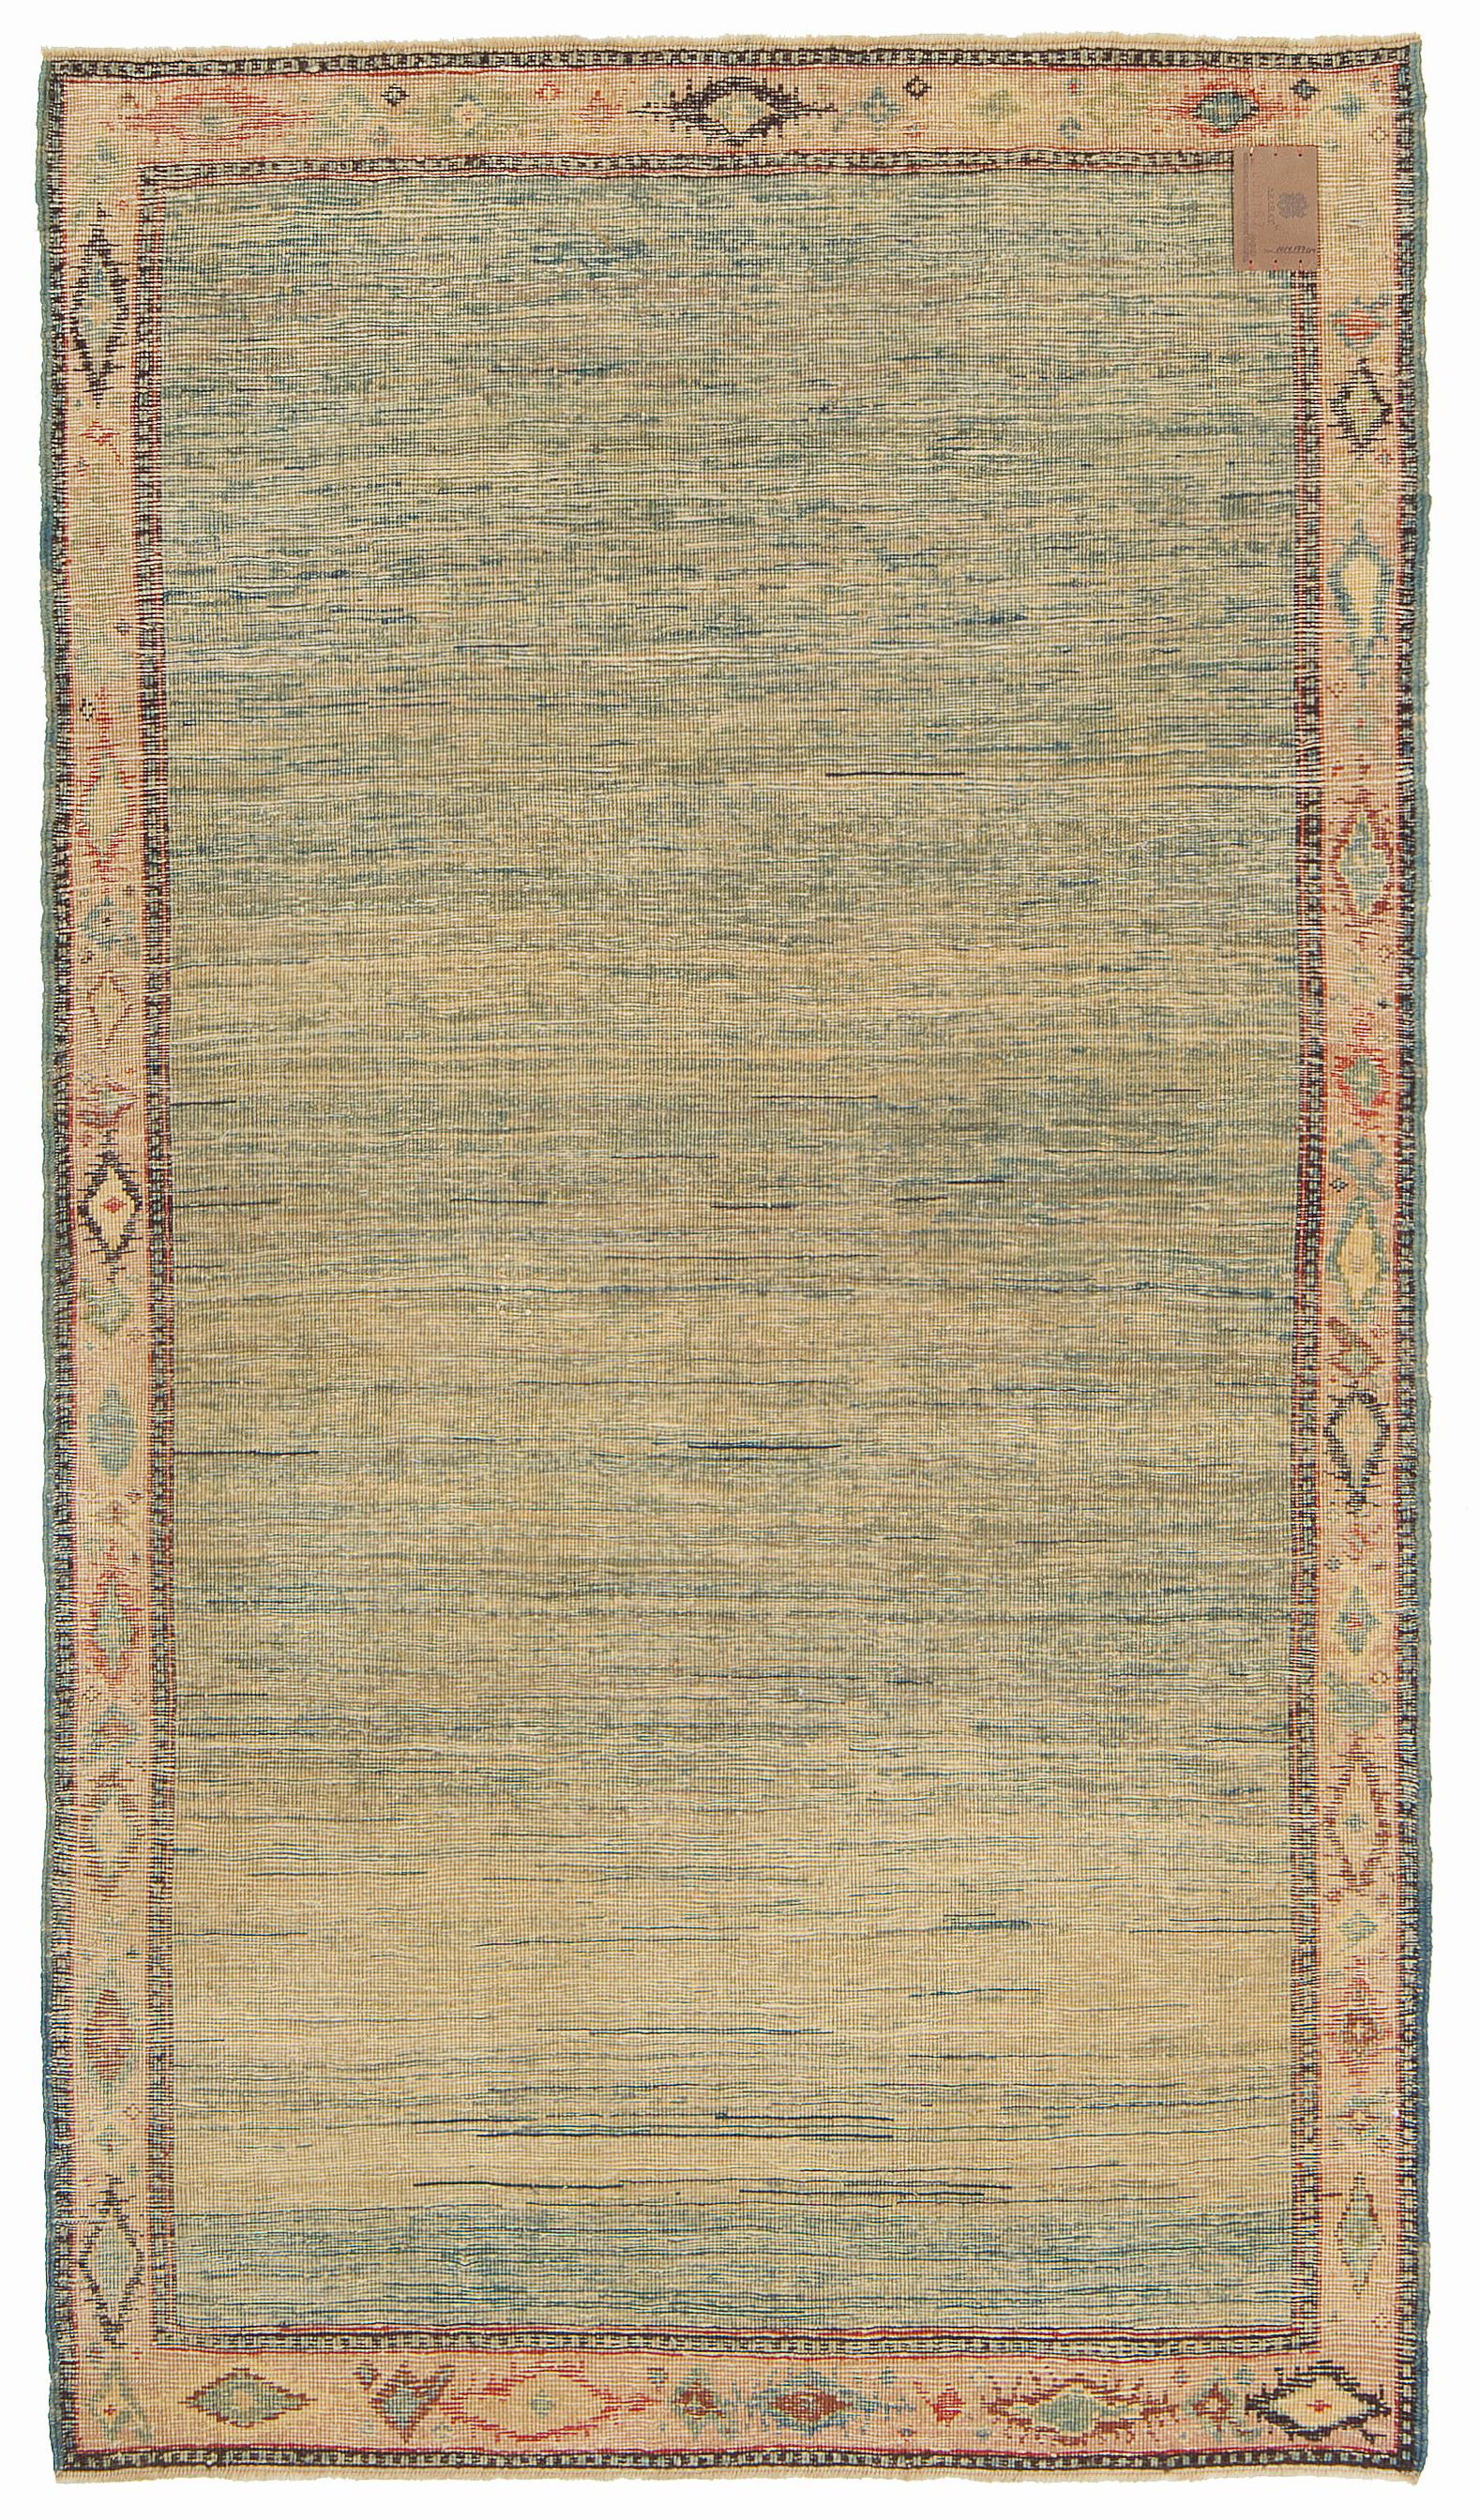 This unique design rug is interpreted by our designers with a mixture of Ararat Rugs’ soft blue tone natural dyed hand-spun yarns. This modern carpet is looking like an impressionist river scene.

Color summary: 11 colors in total, most used 4